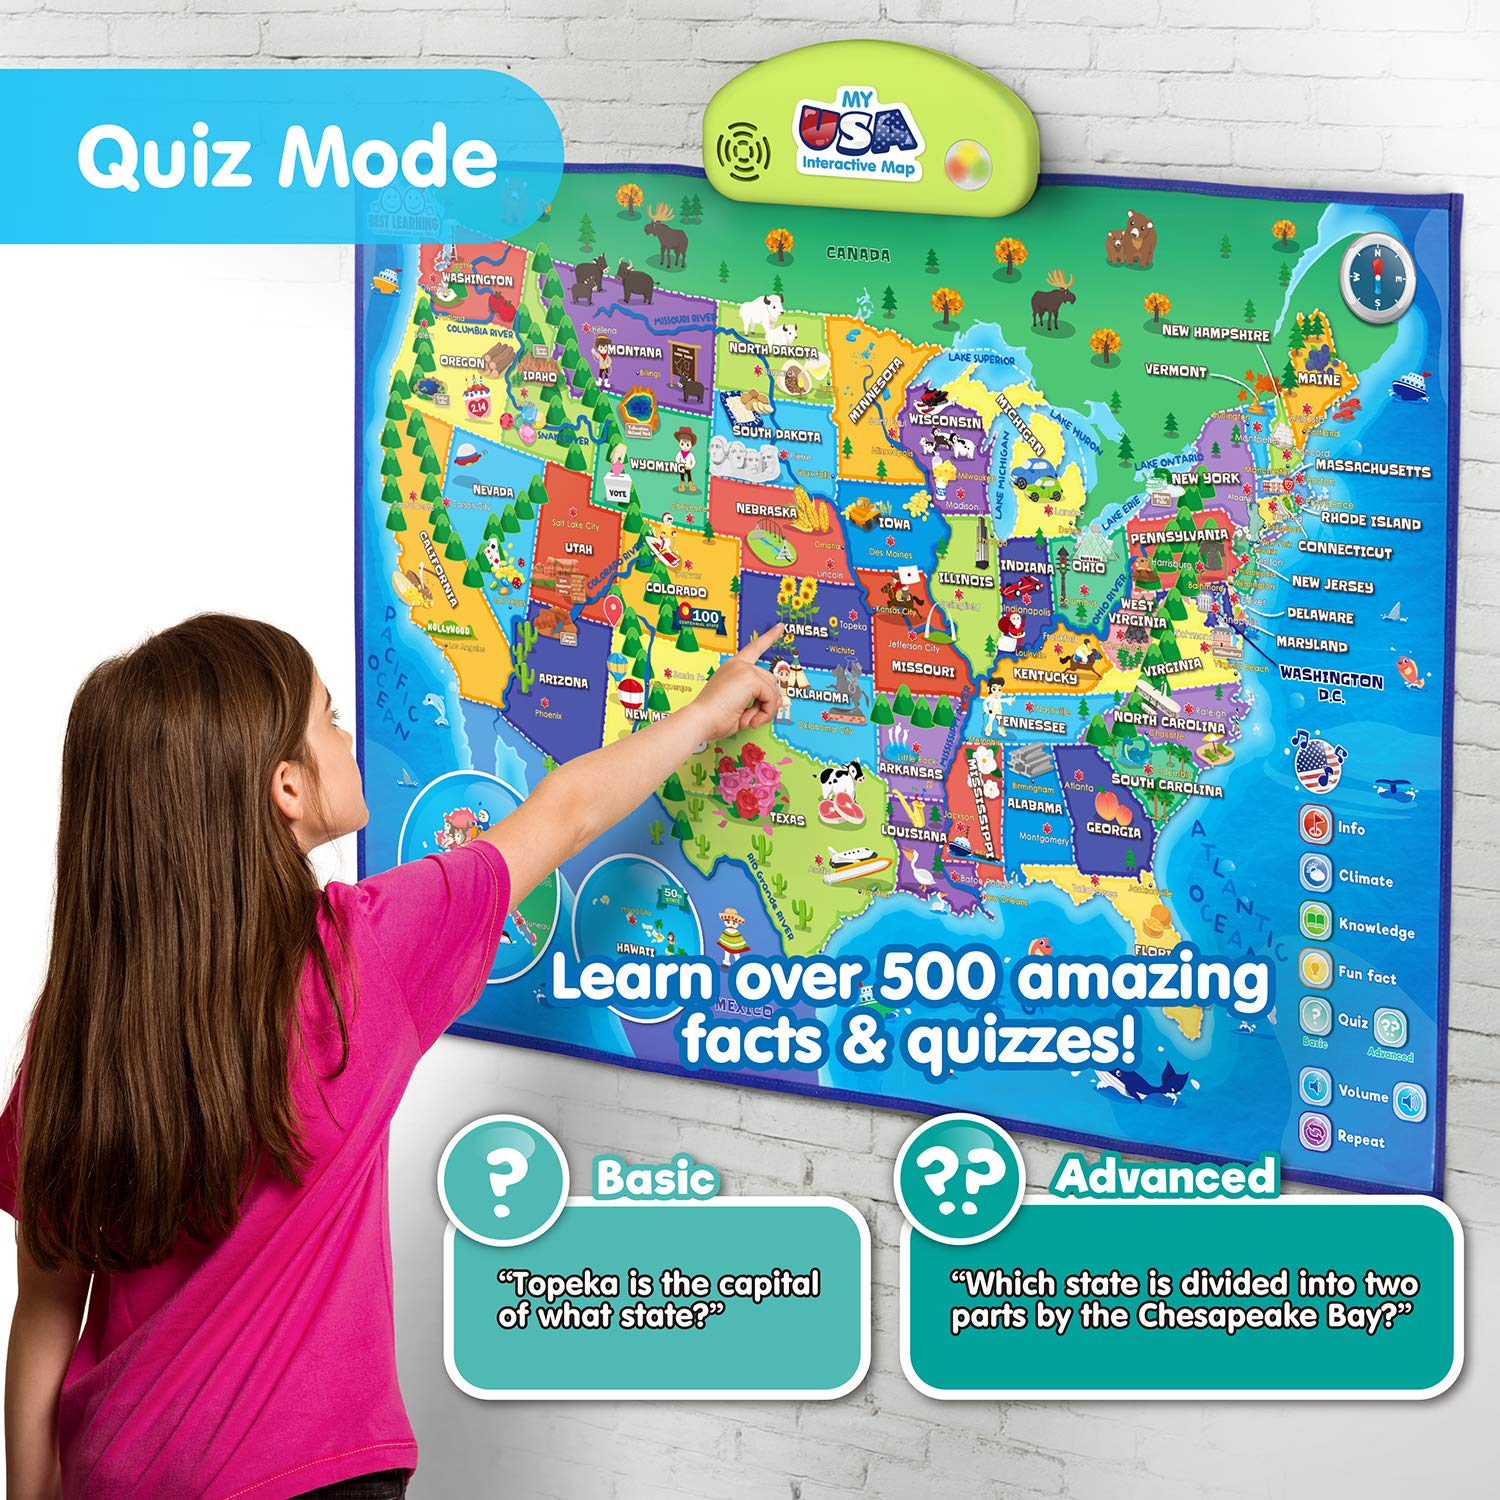 BEST LEARNING i-Poster My USA Interactive Map - Educational Smart Talking US Poster Toy for Kids Boy or Girl Ages 5 to 12 Years - United States Geography Electronic Game Children 5, 6, 7 Gift Present